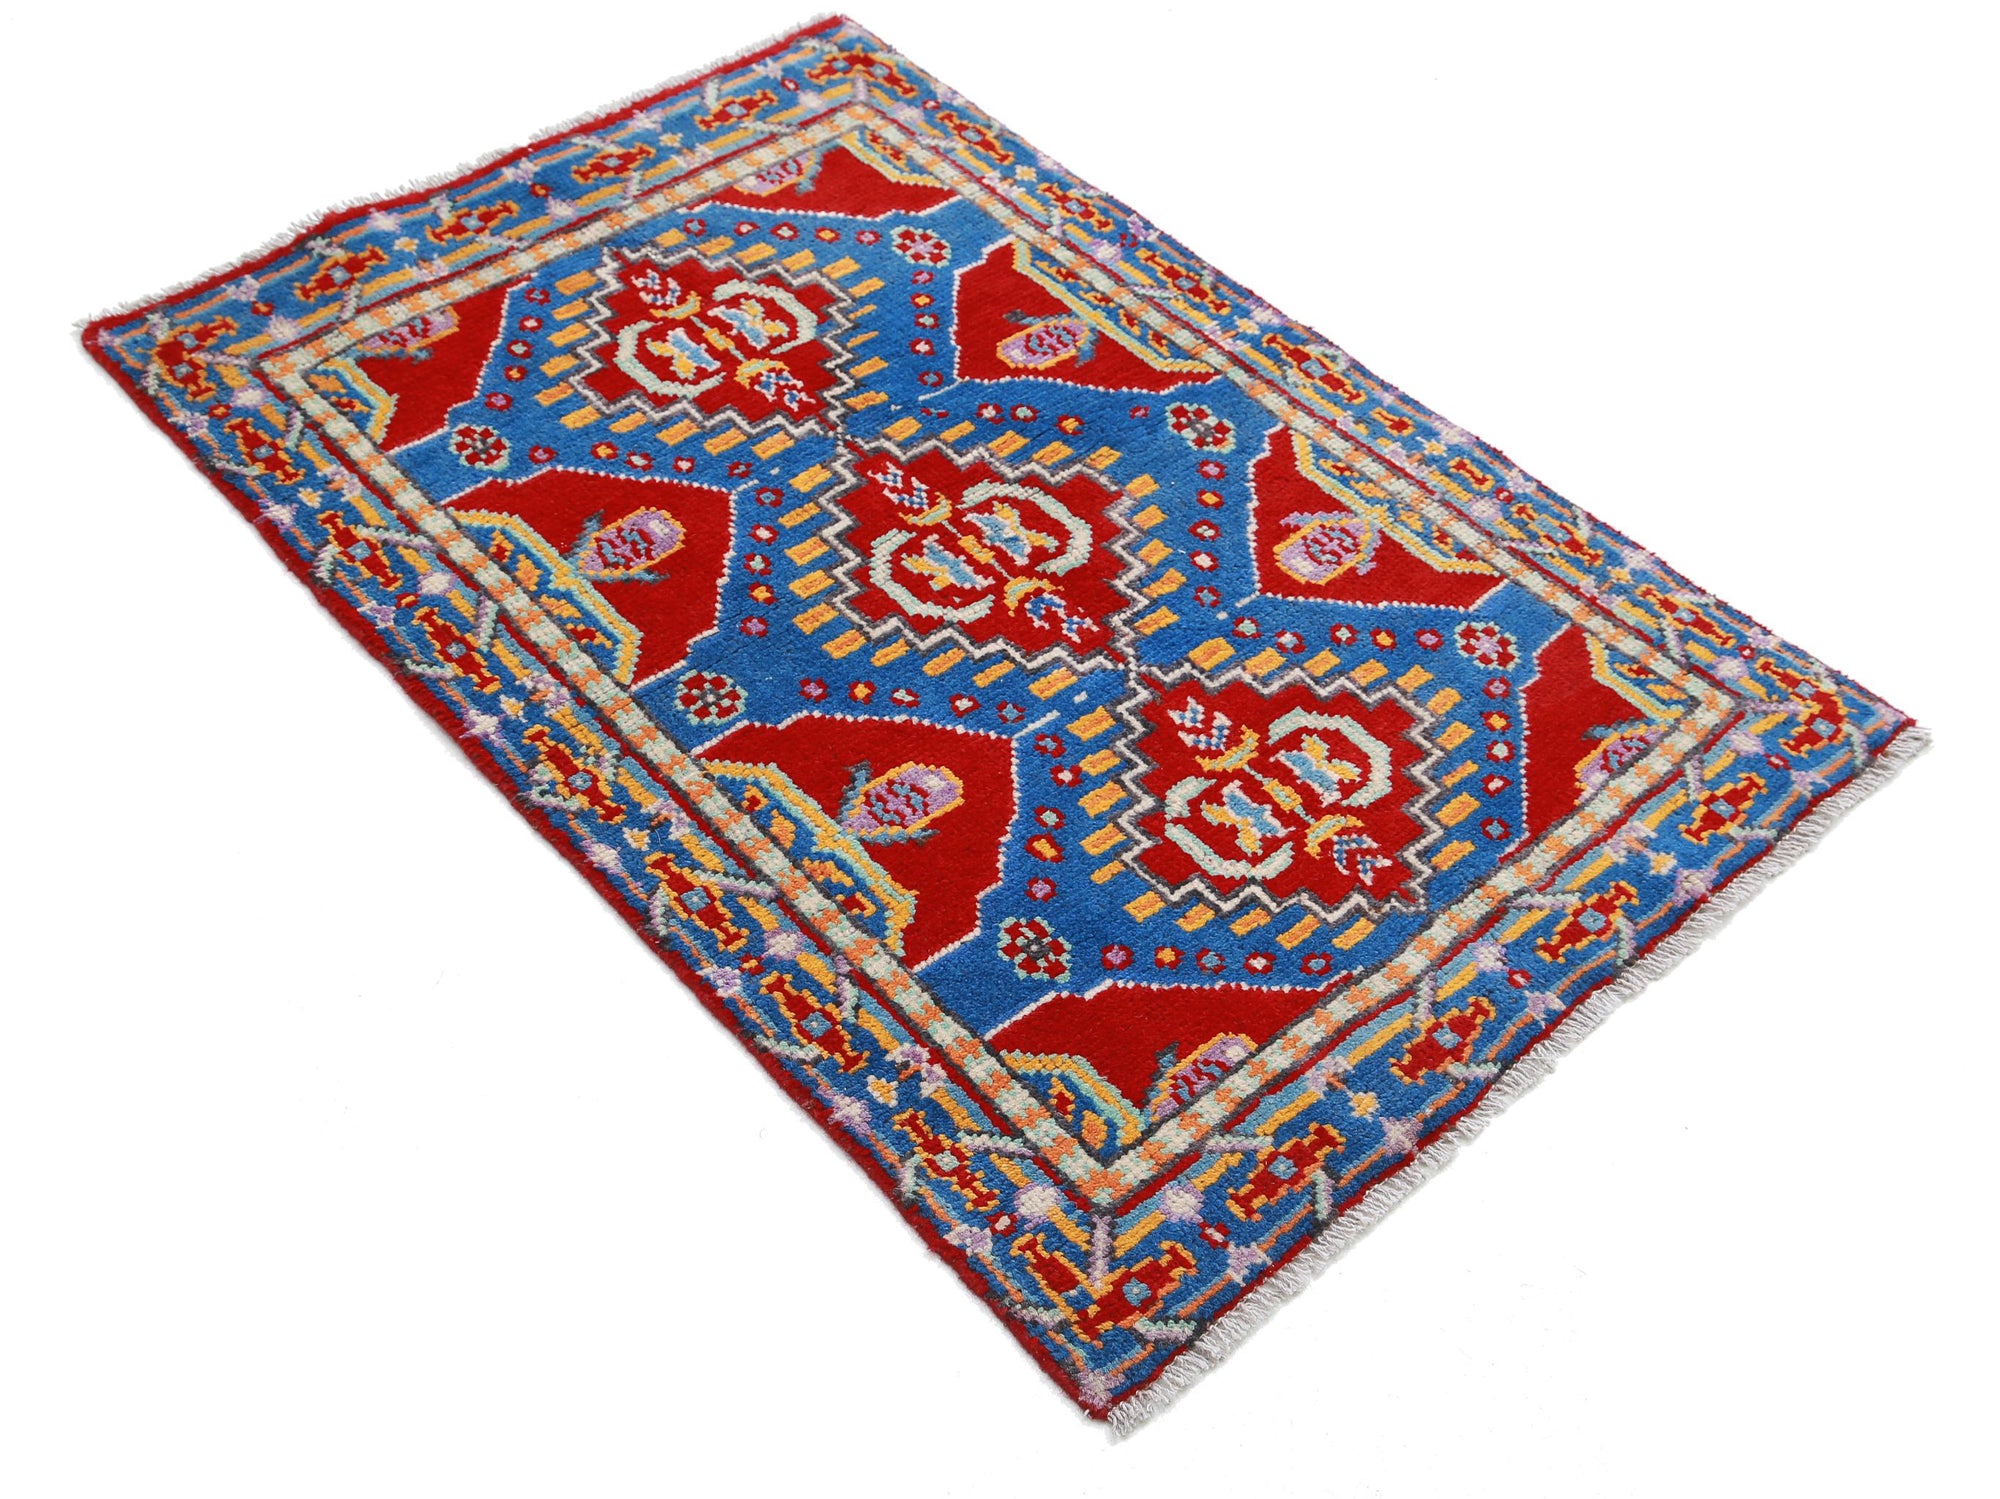 Revival-hand-knotted-qarghani-wool-rug-5014187-1.jpg